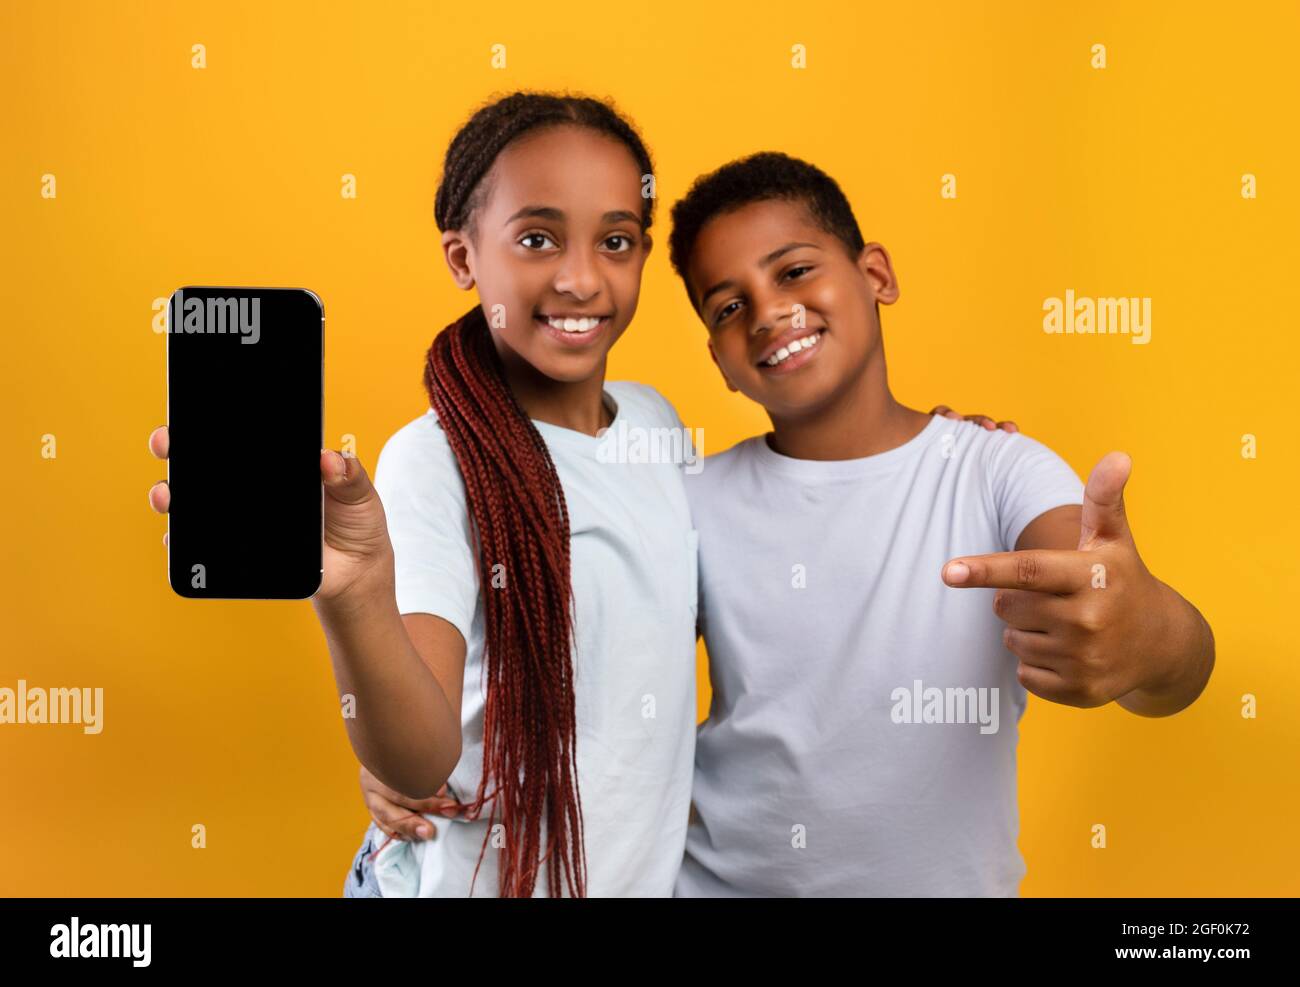 Adorable black teens brother and sister showing smartphone, mockup Stock Photo